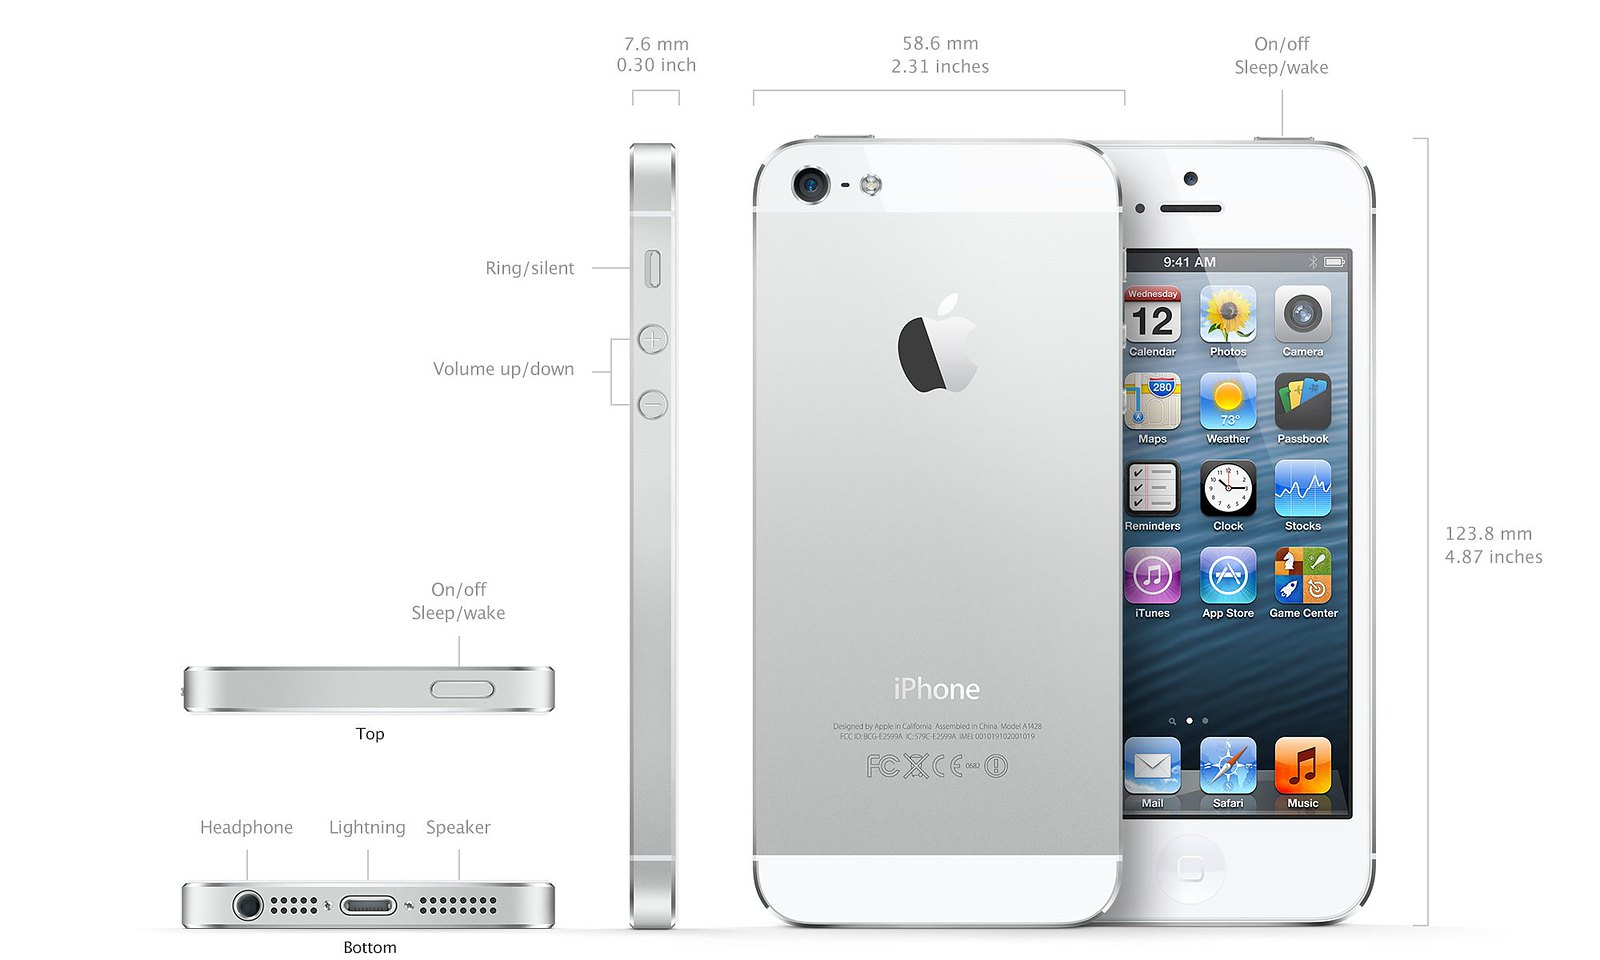 Iphone 5 White And Black